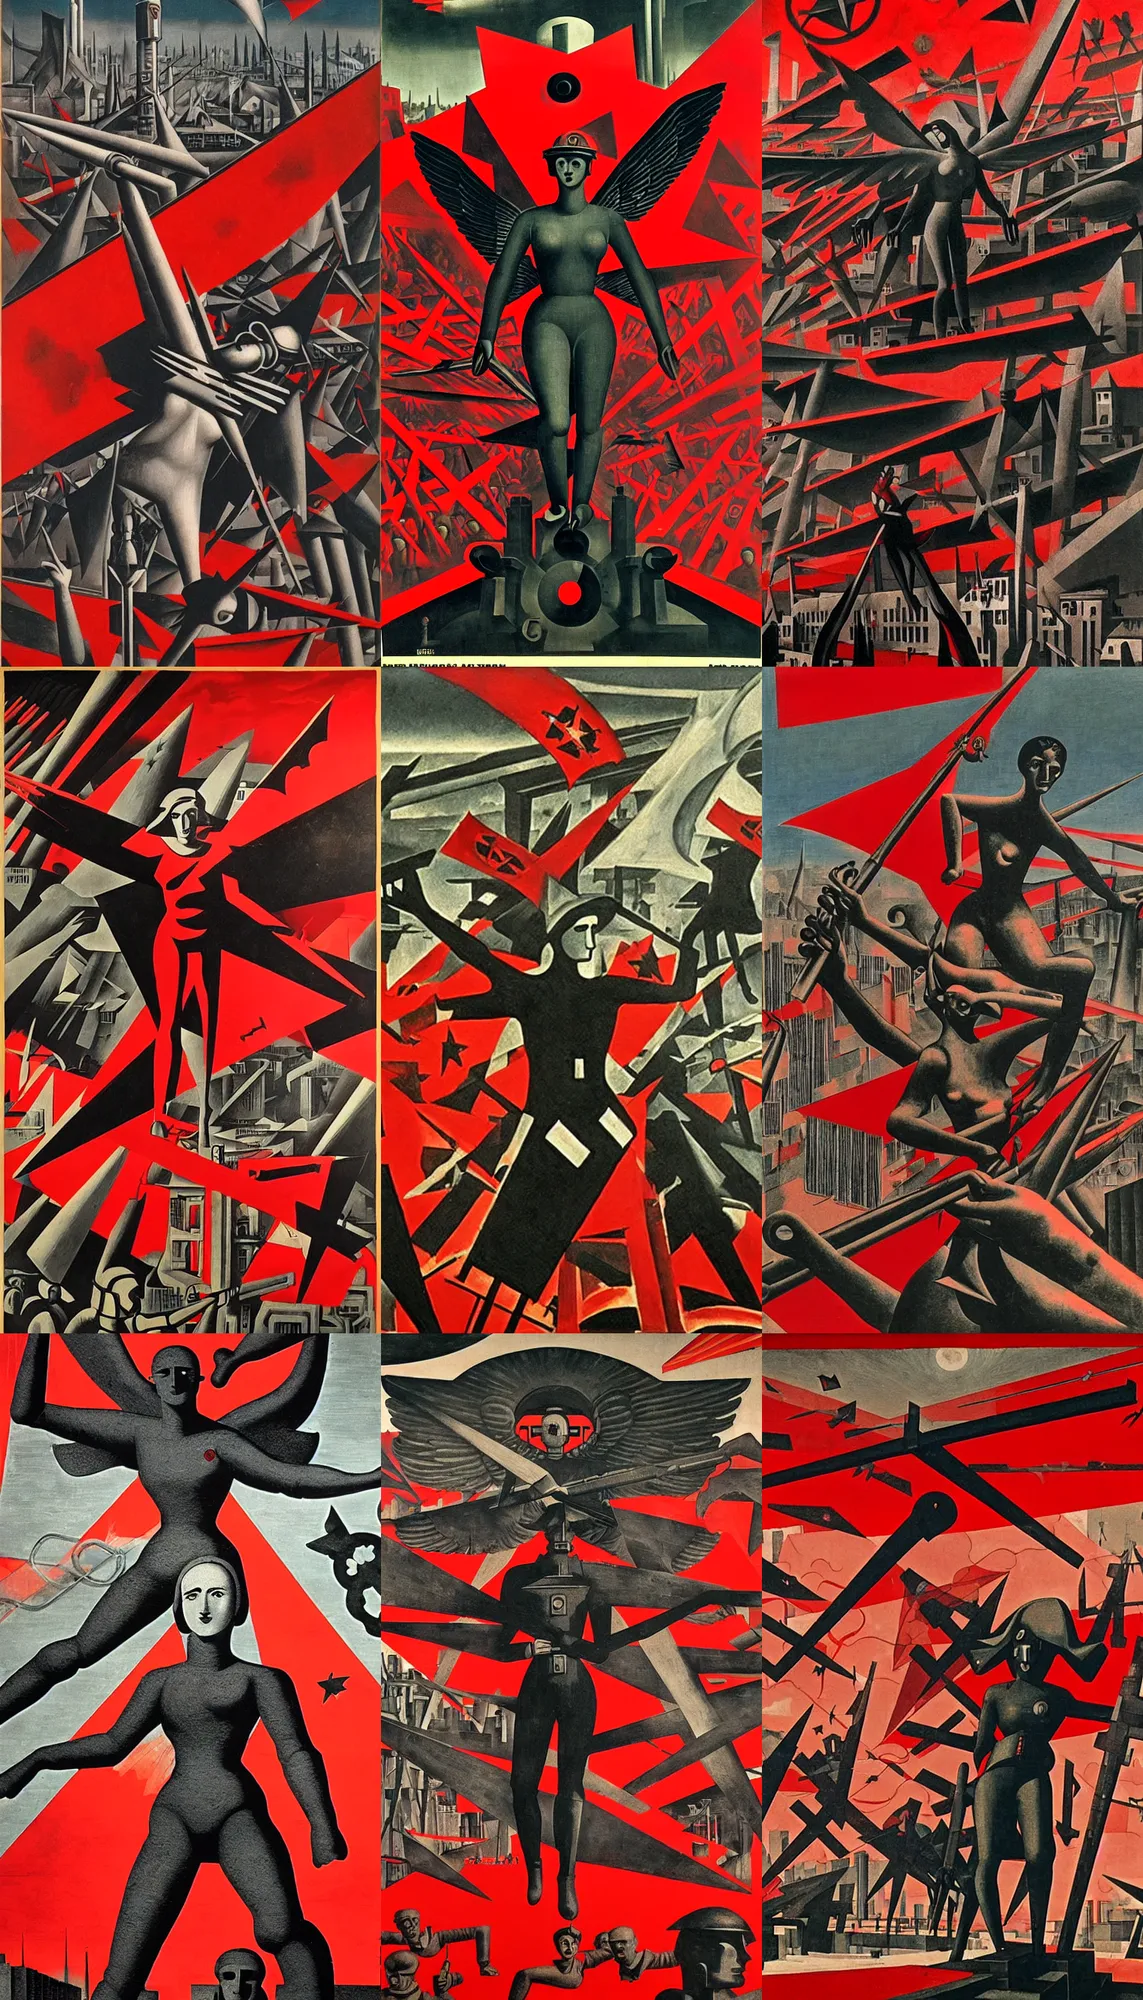 Prompt: socialist totalitarian angel, futuristic alternate timeline, anarcho - communist hordes, red and black flags, modernist factories in background, art by max ernst, cnt spanish civil war era propaganda, extremely detailed, 4 k